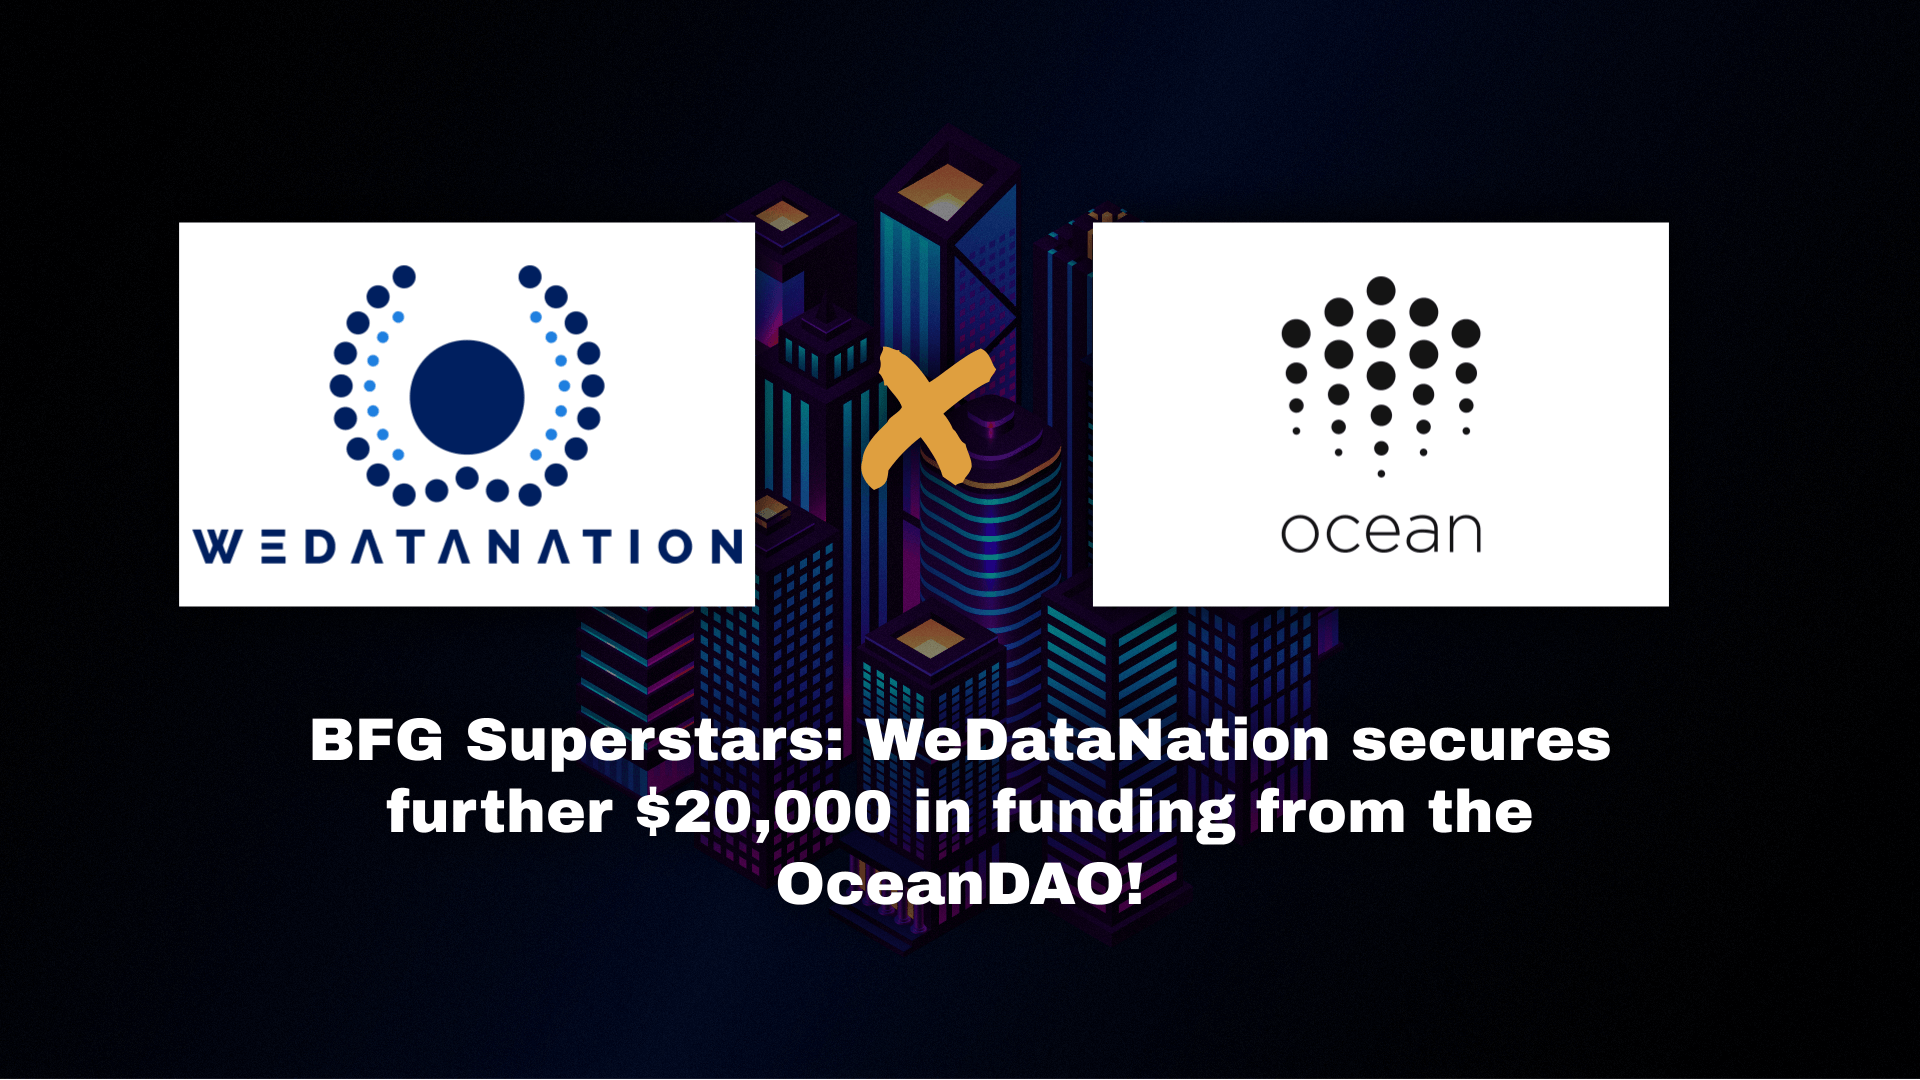 WeDataNation secures further $20,000 in funding from the OceanDAO